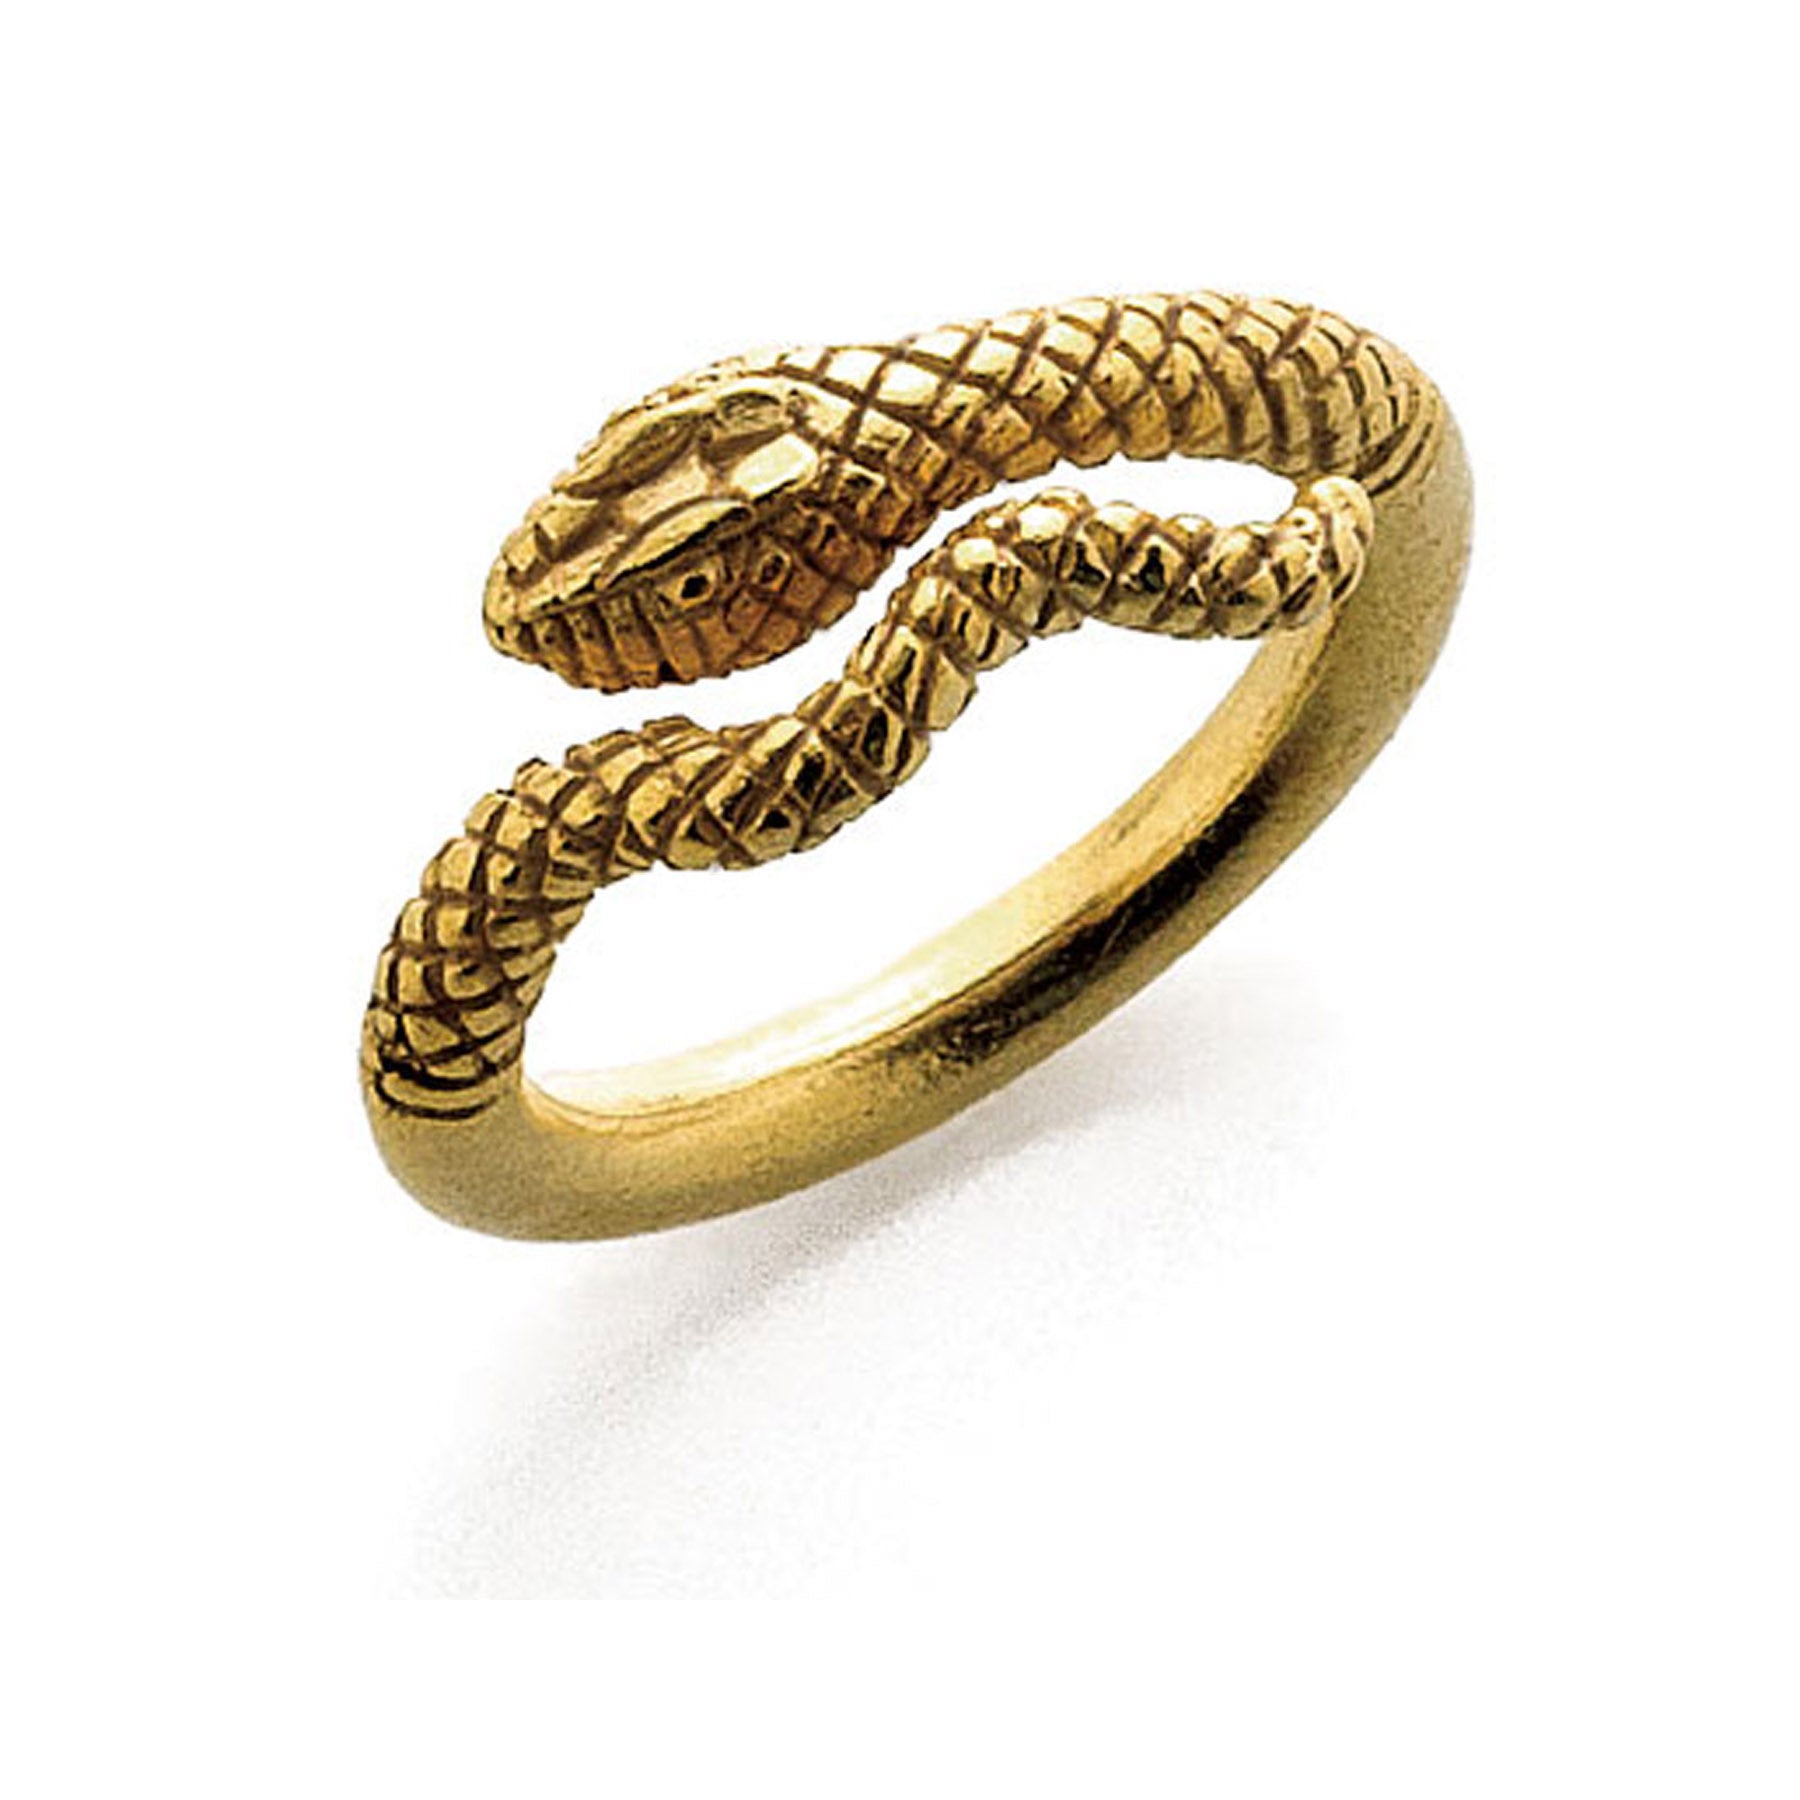 Egyptian Snake Ring - The Walters Art Museum